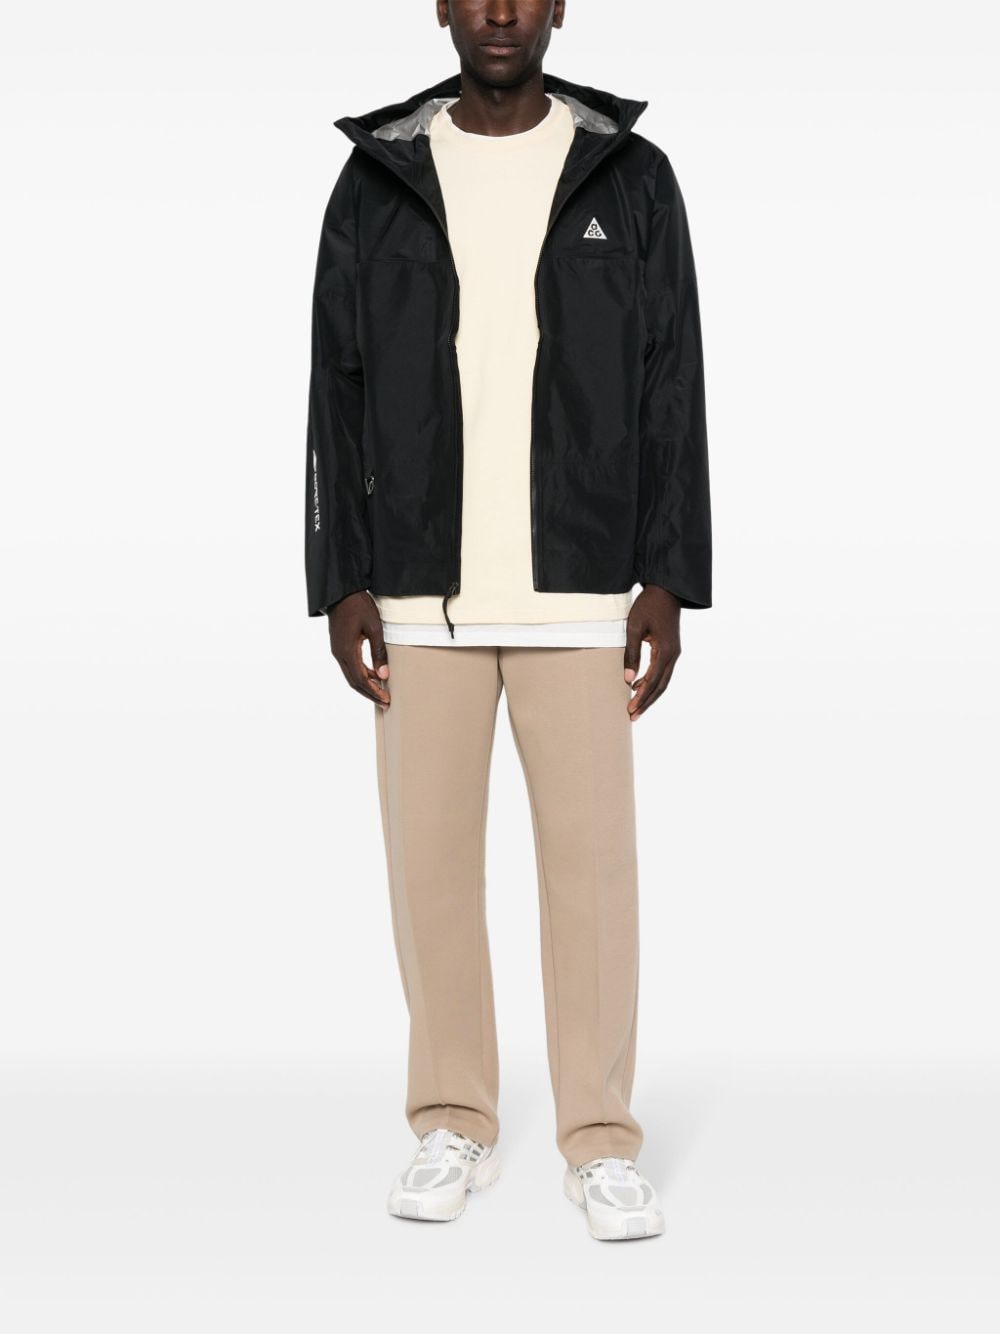 Image 2 of Nike ACG Chain of Craters hooded jacket